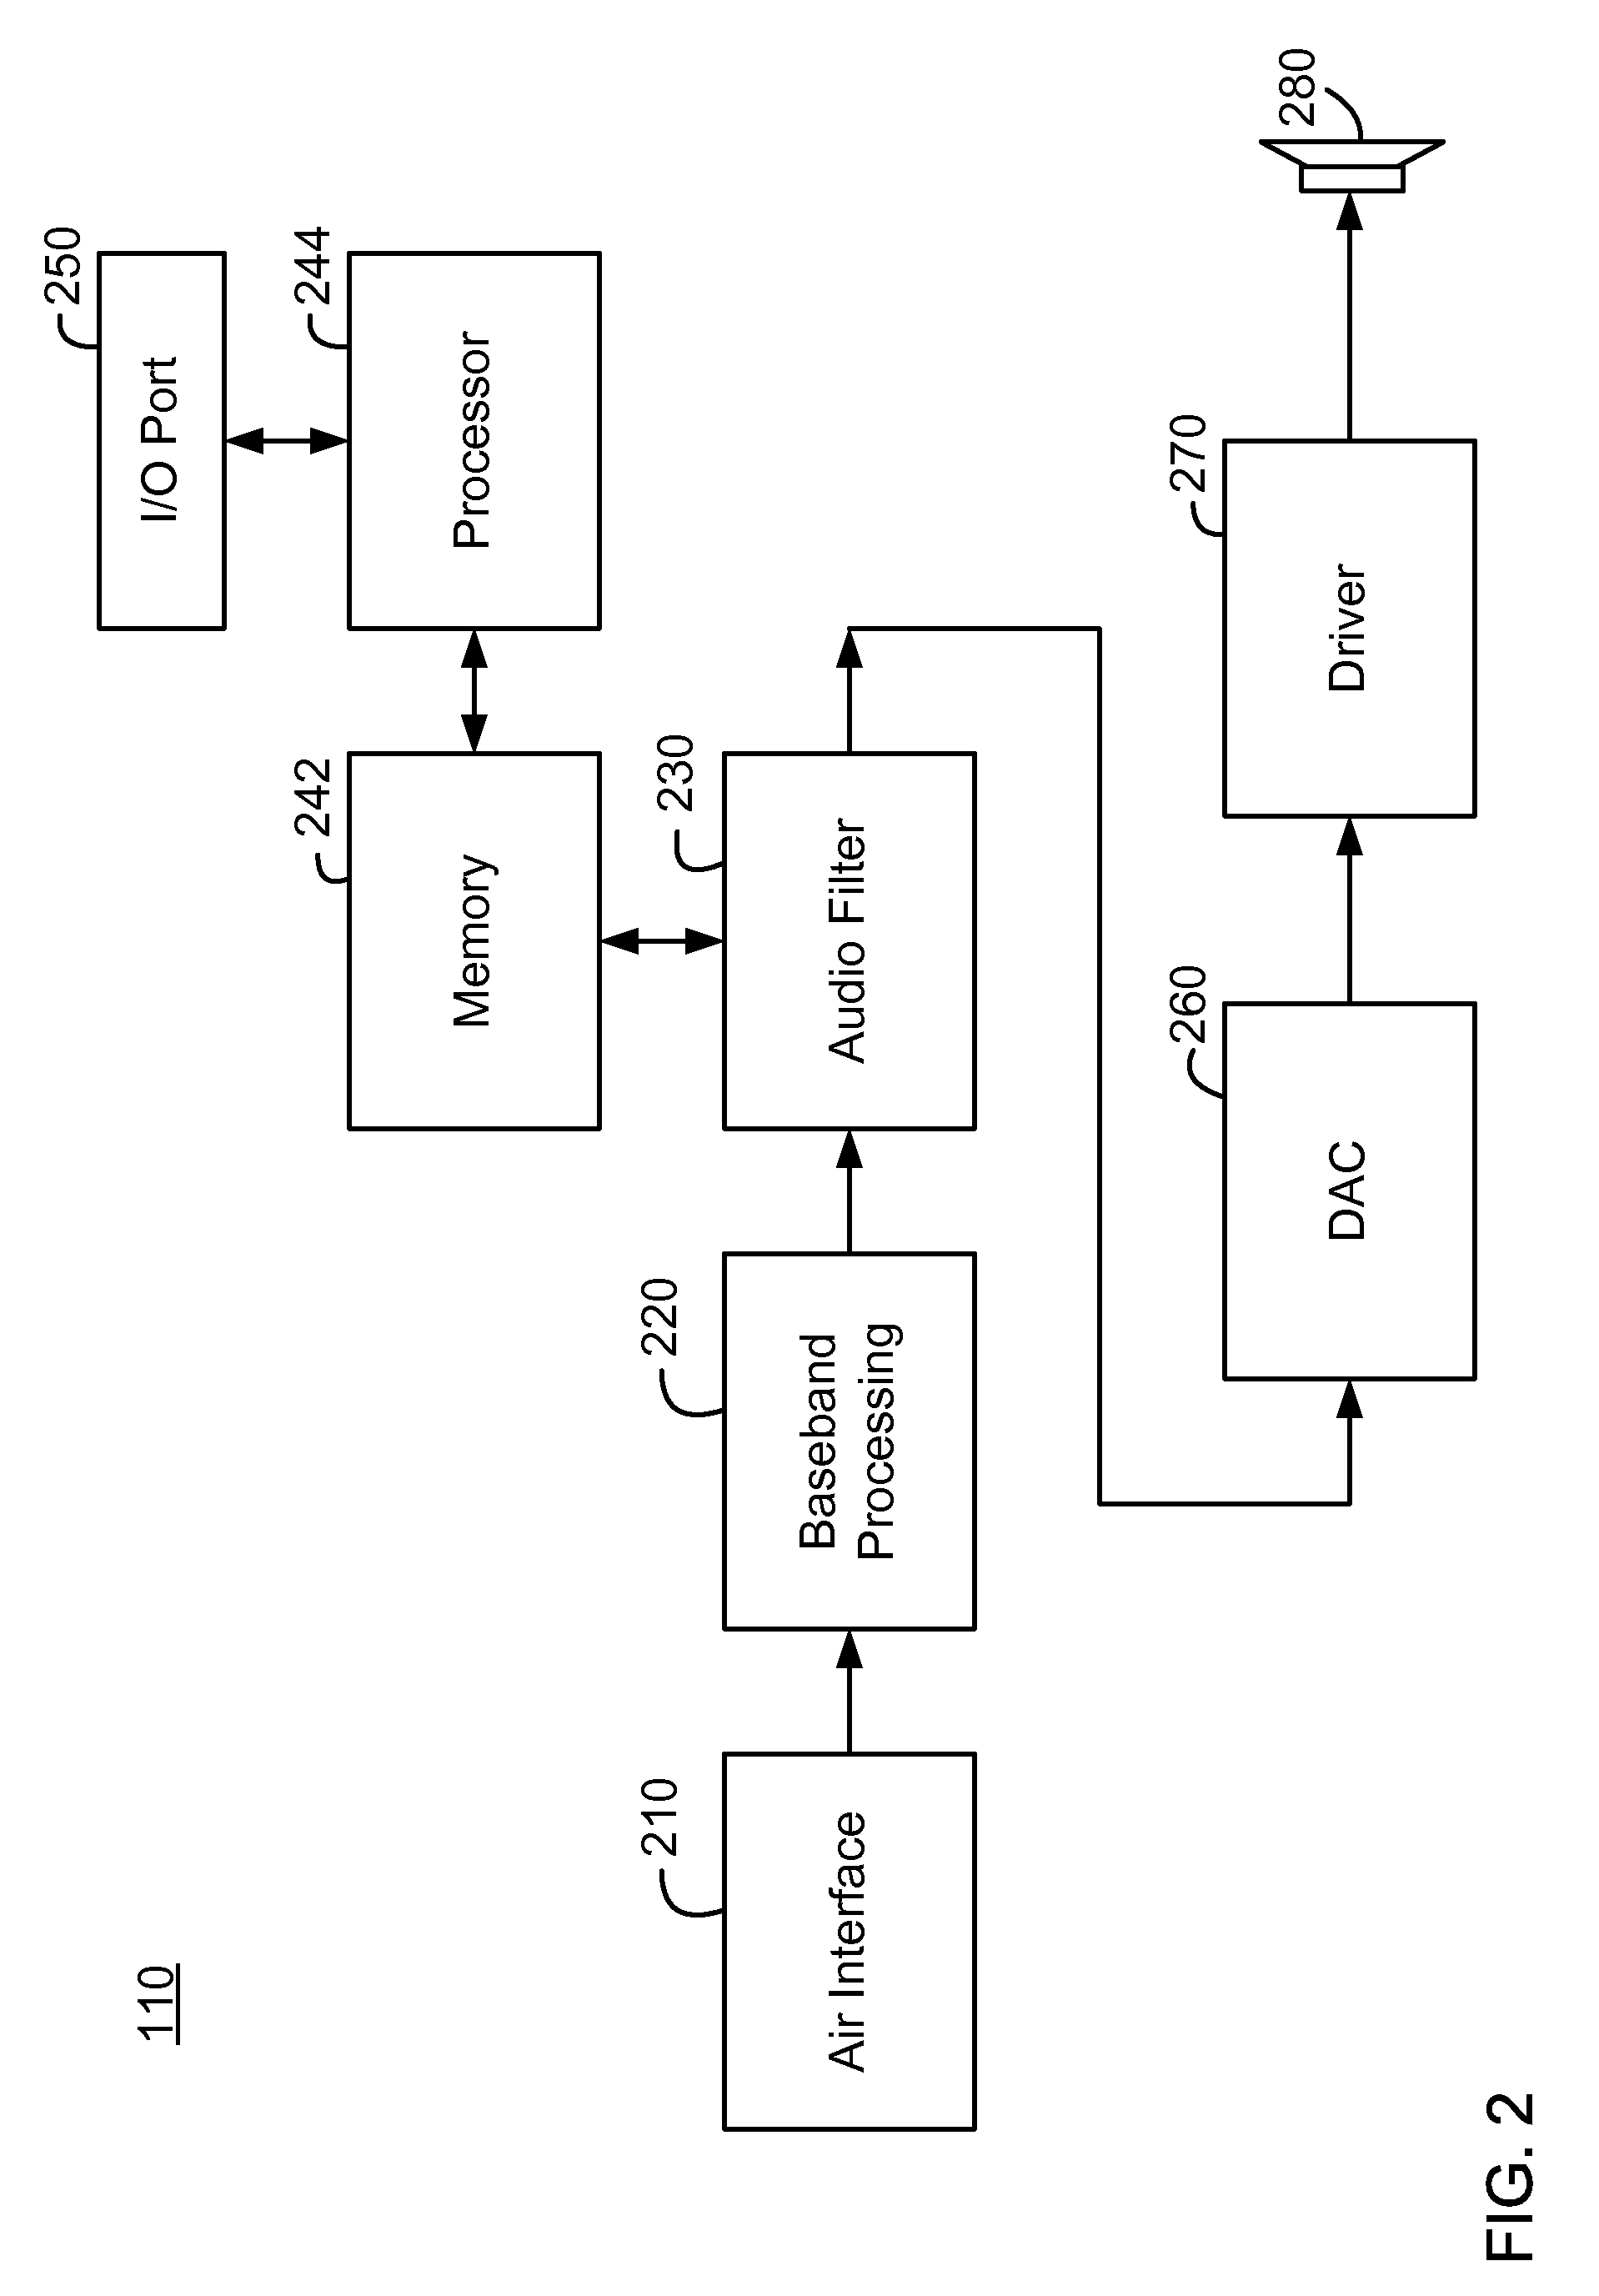 Method and apparatus for audio path filter tuning